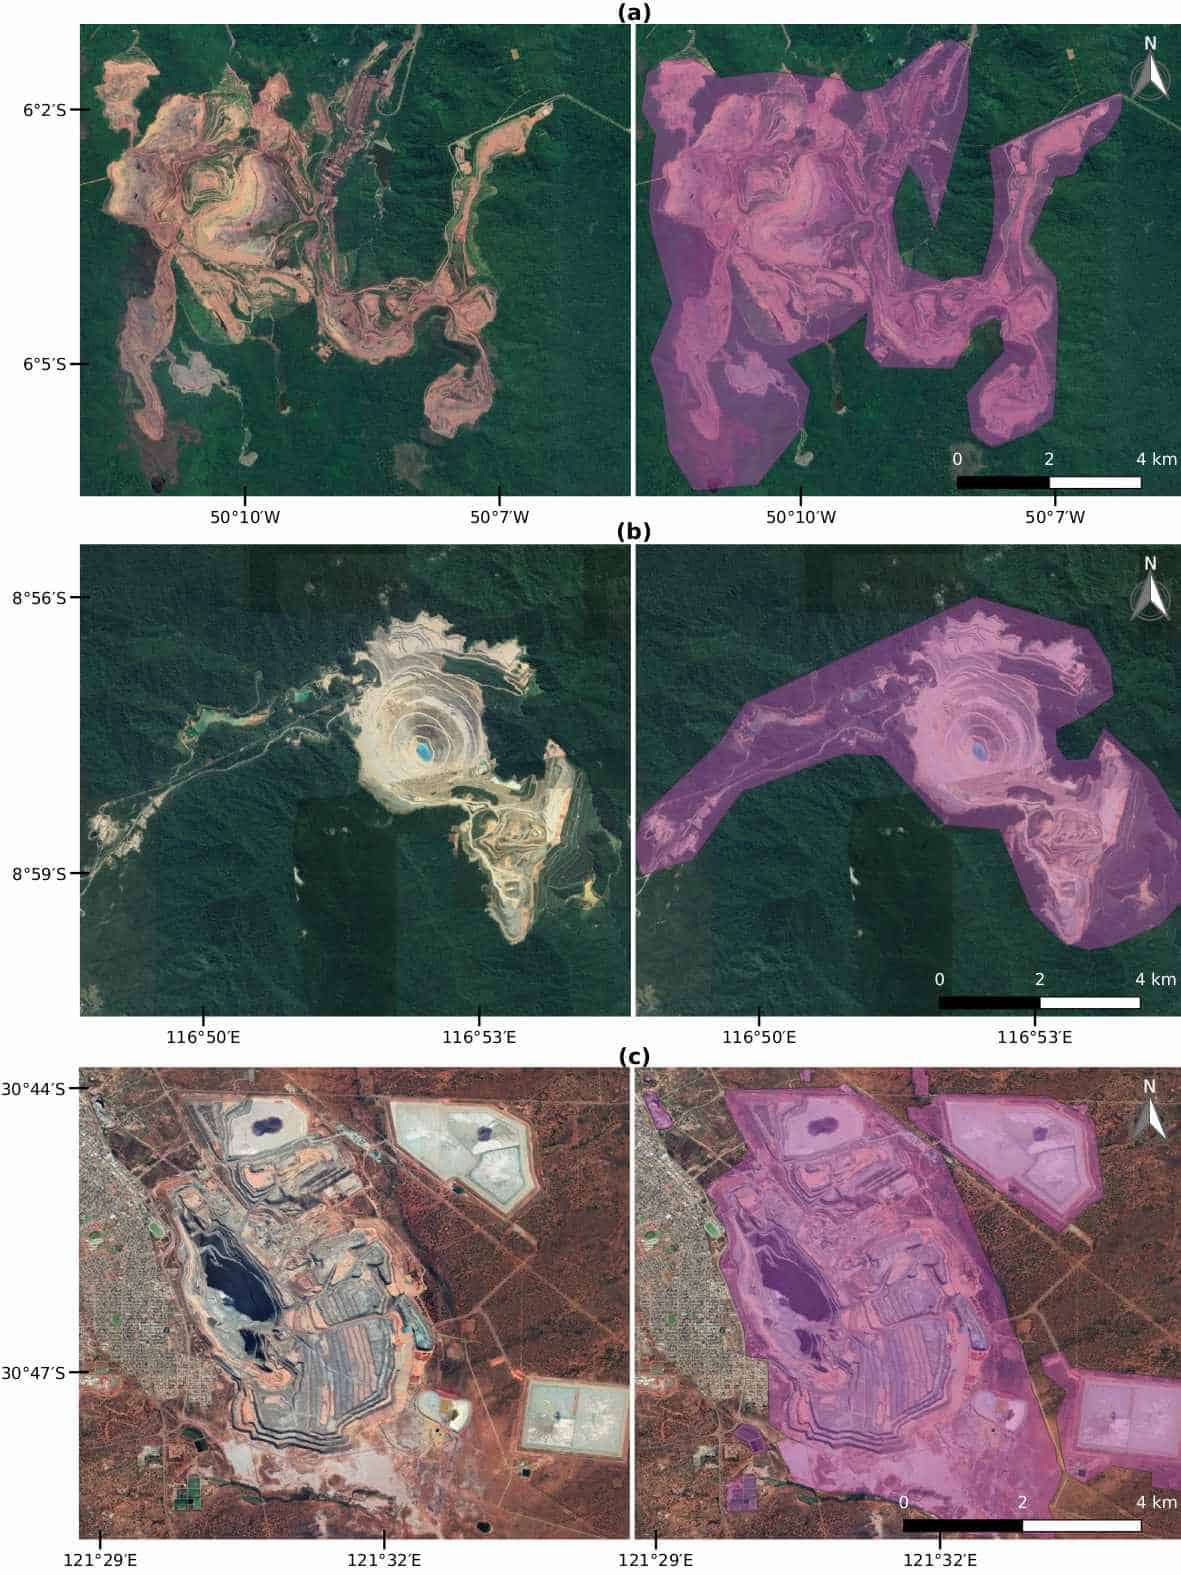 Examples of mines viewed from Google Satellite images